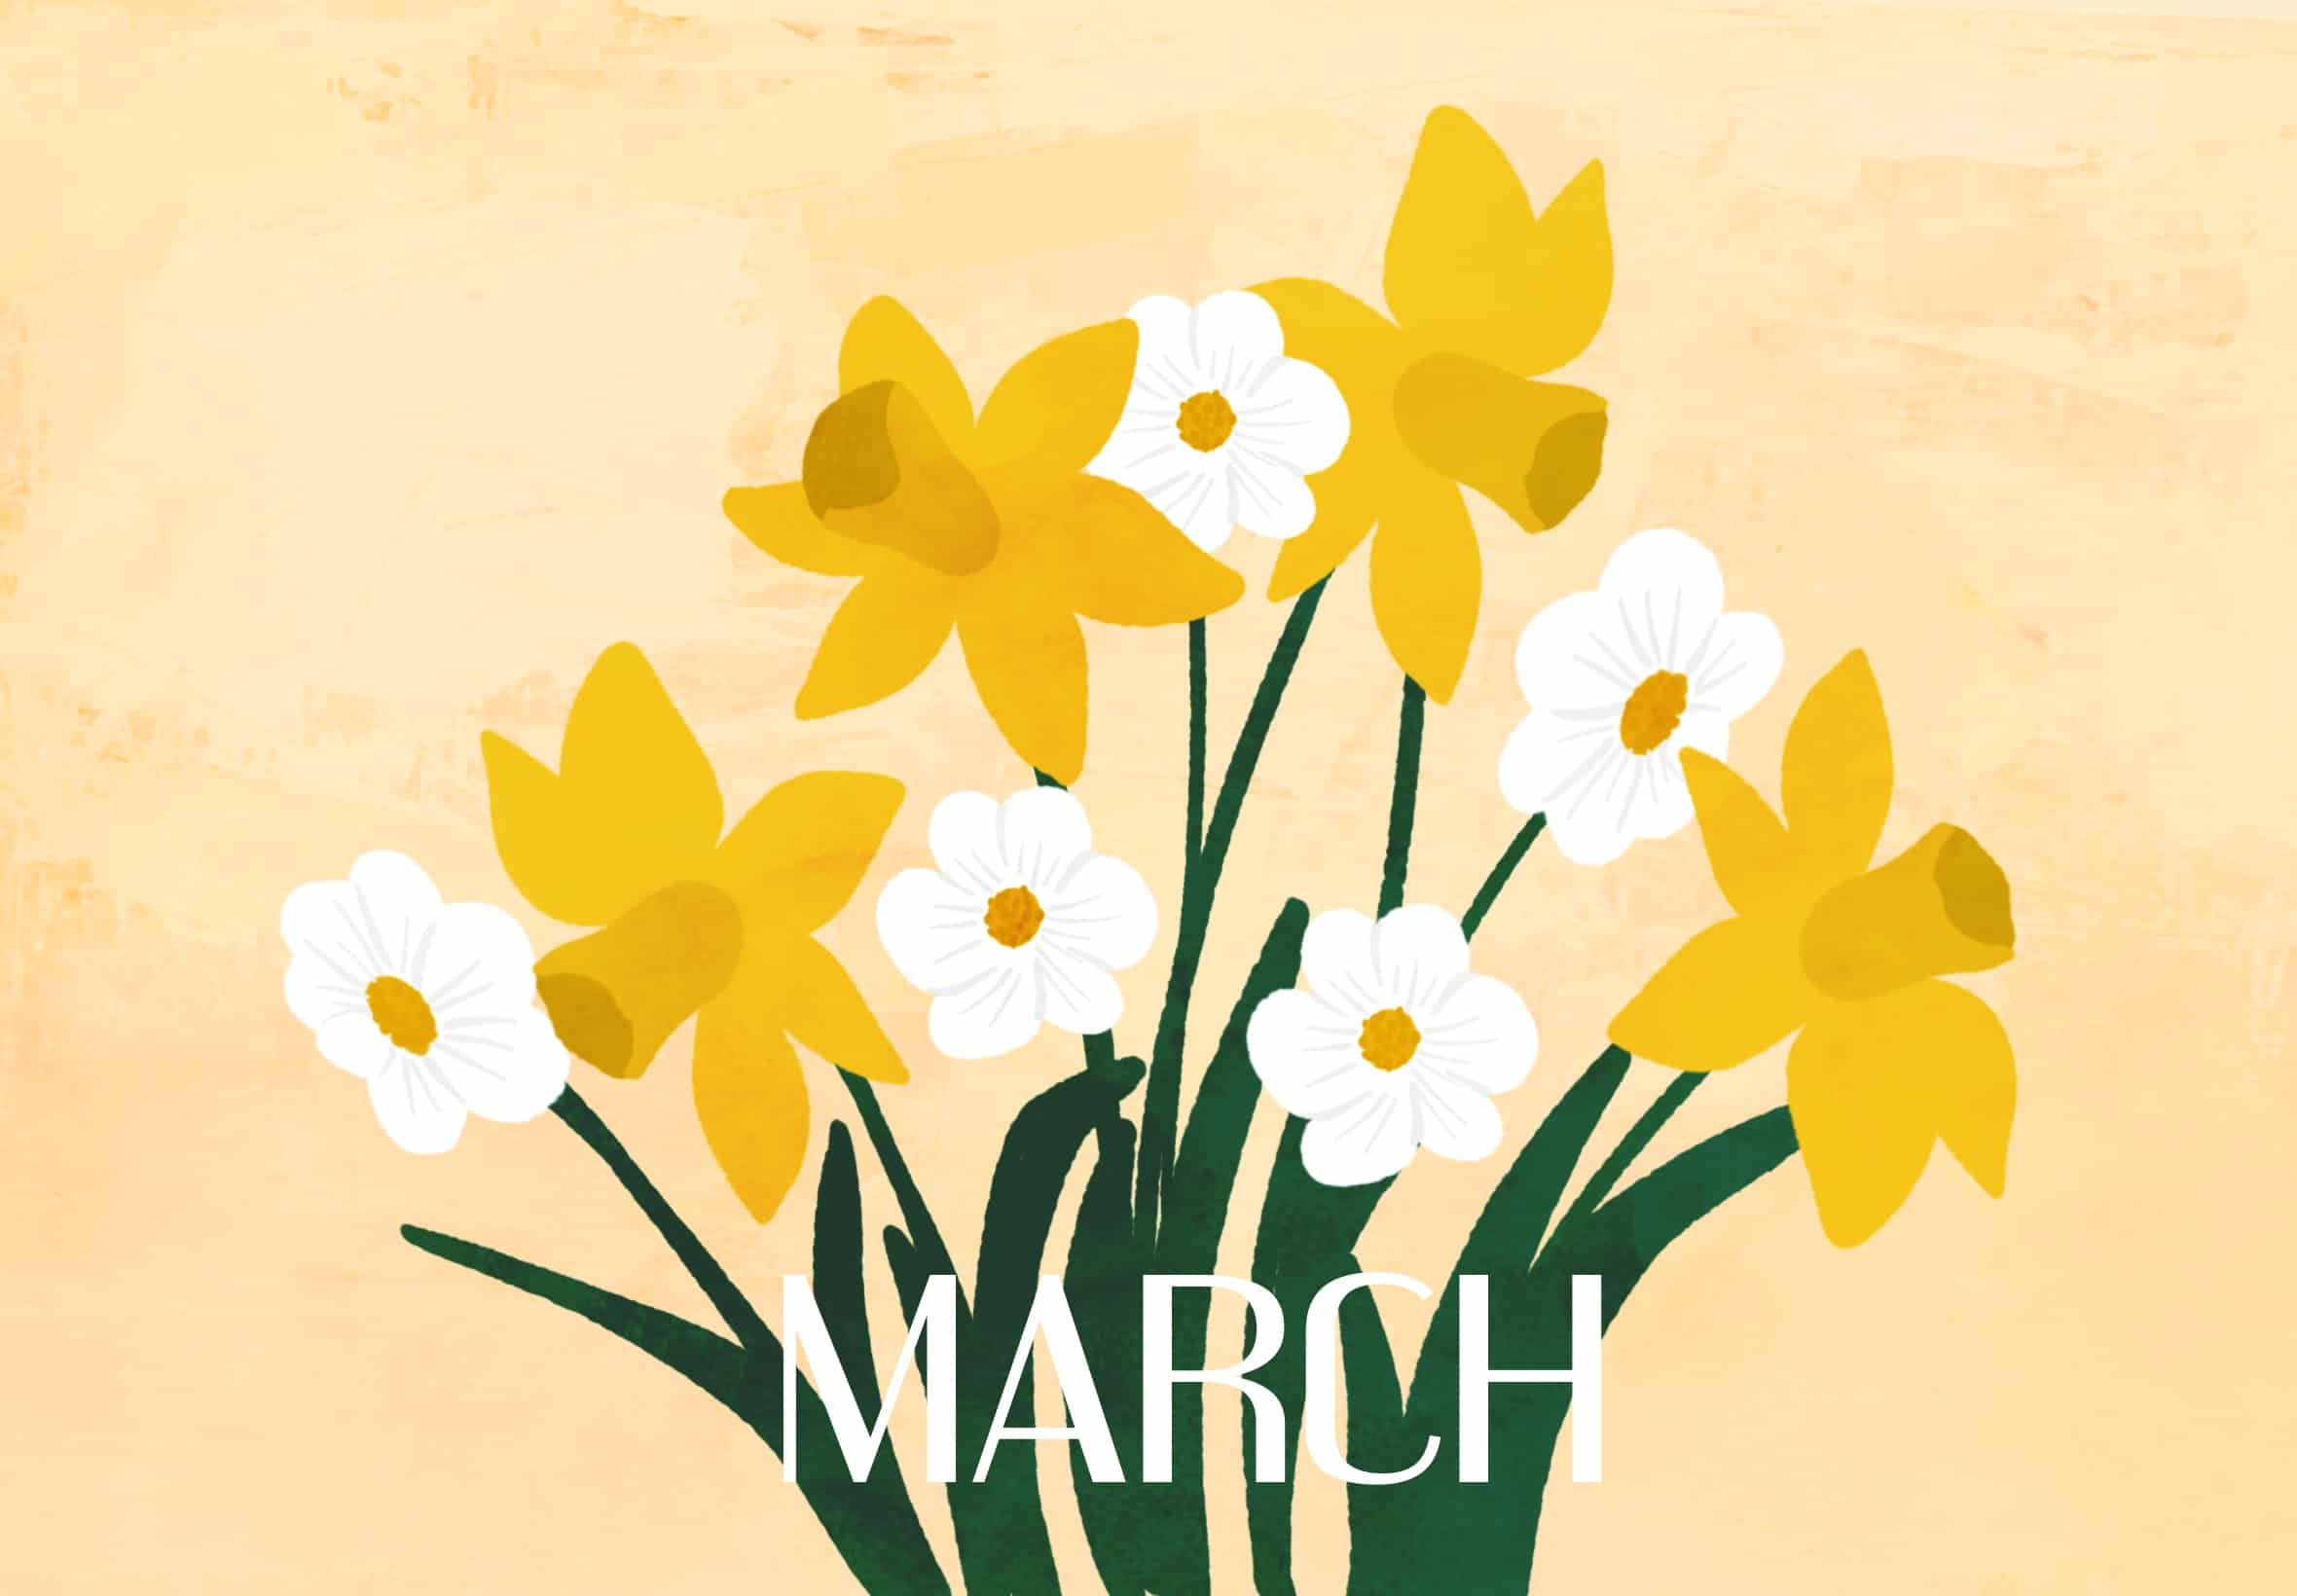 March birth flowers - daffodil and jonquil